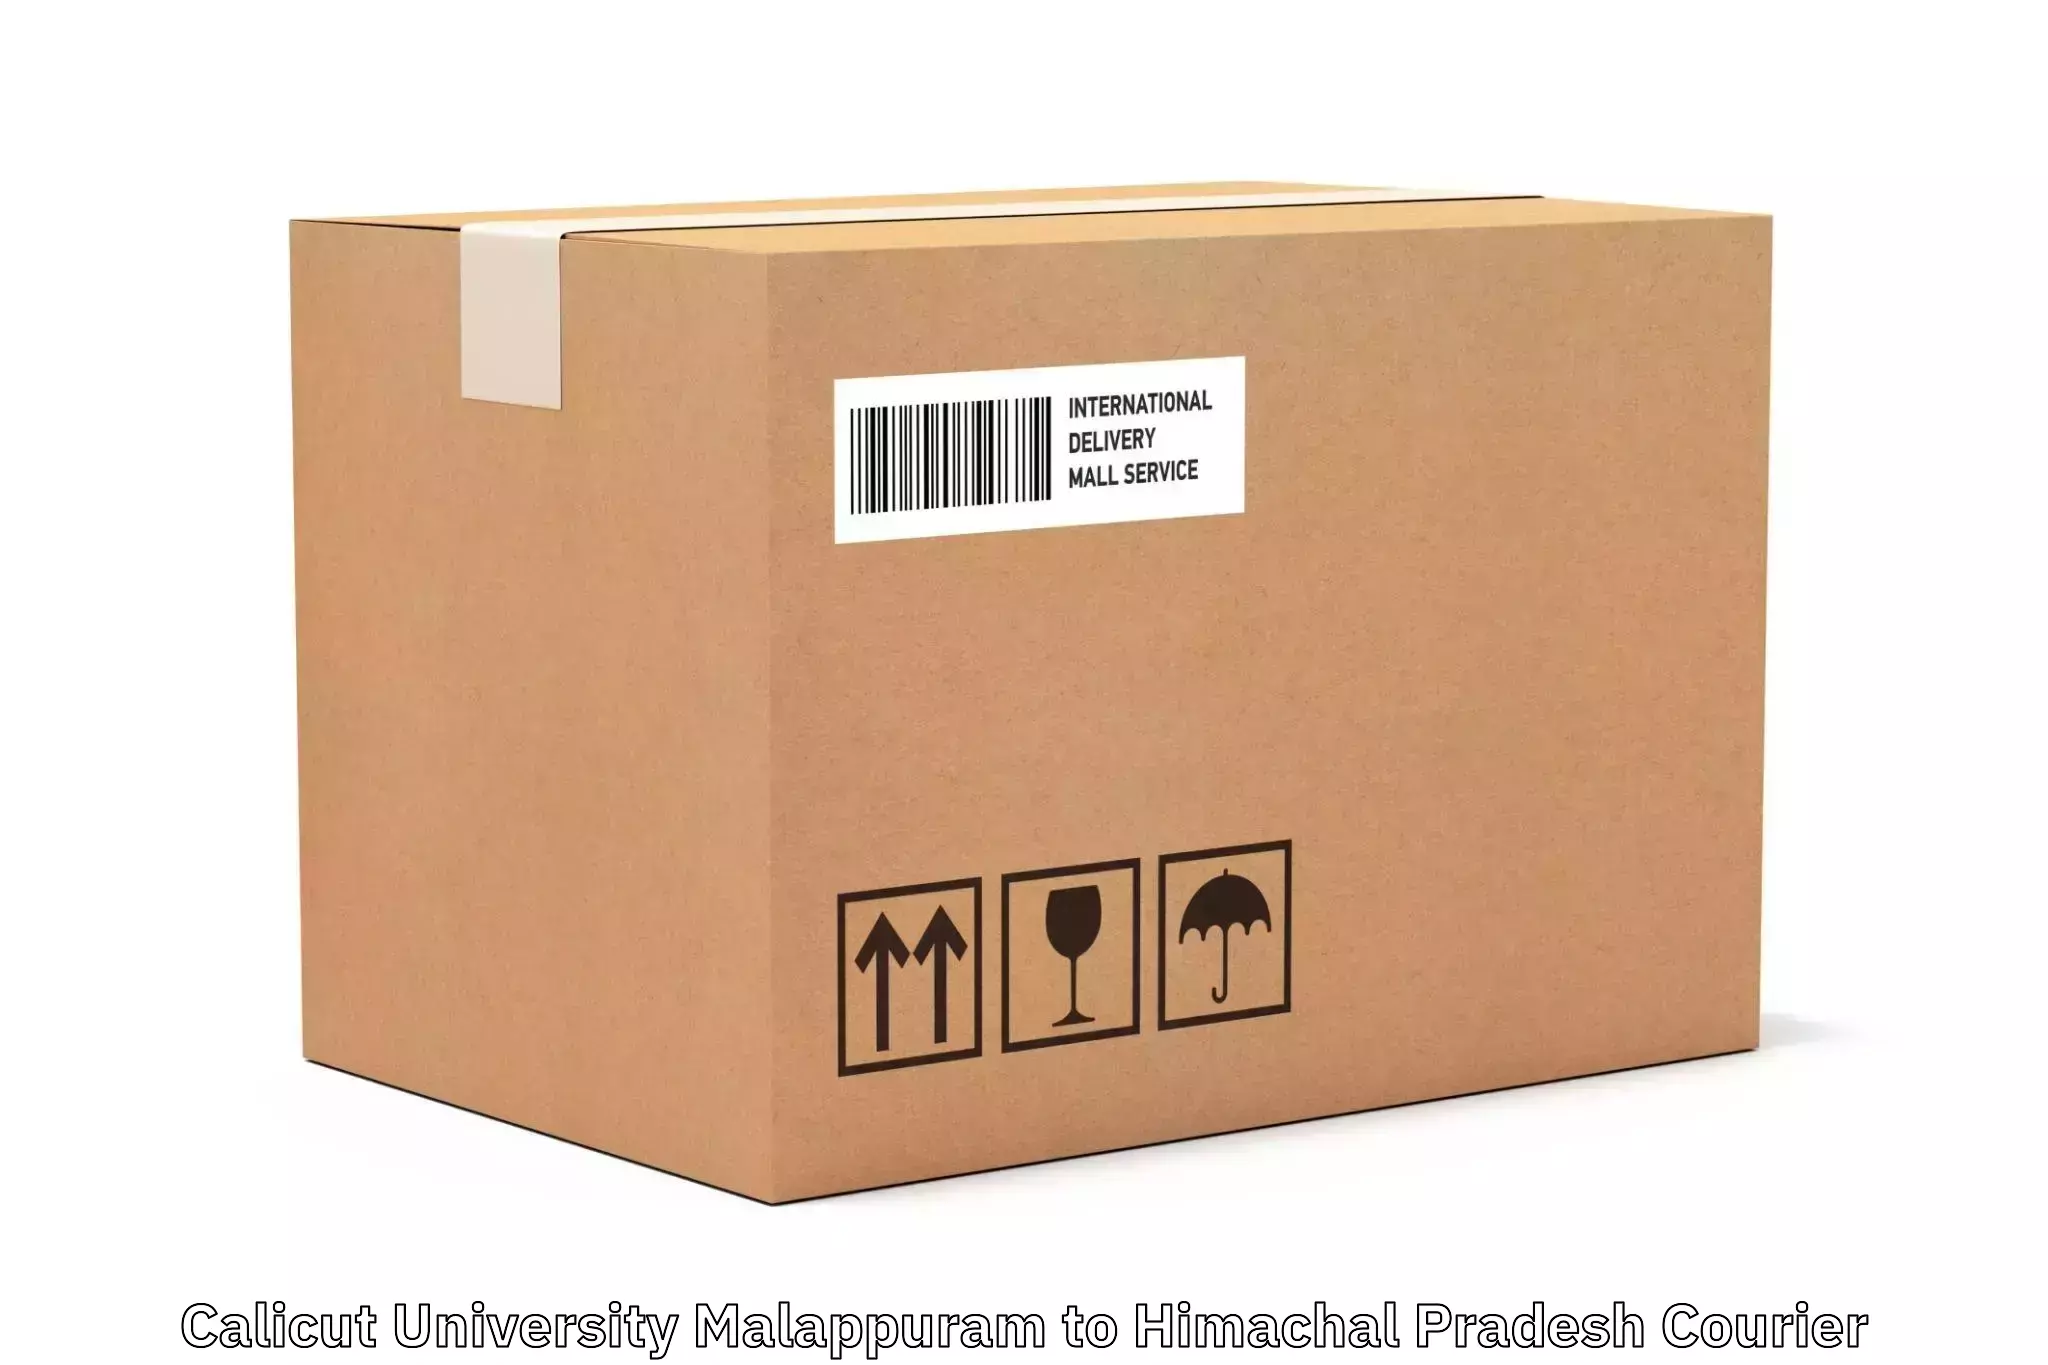 Reliable parcel services in Calicut University Malappuram to Kyelang